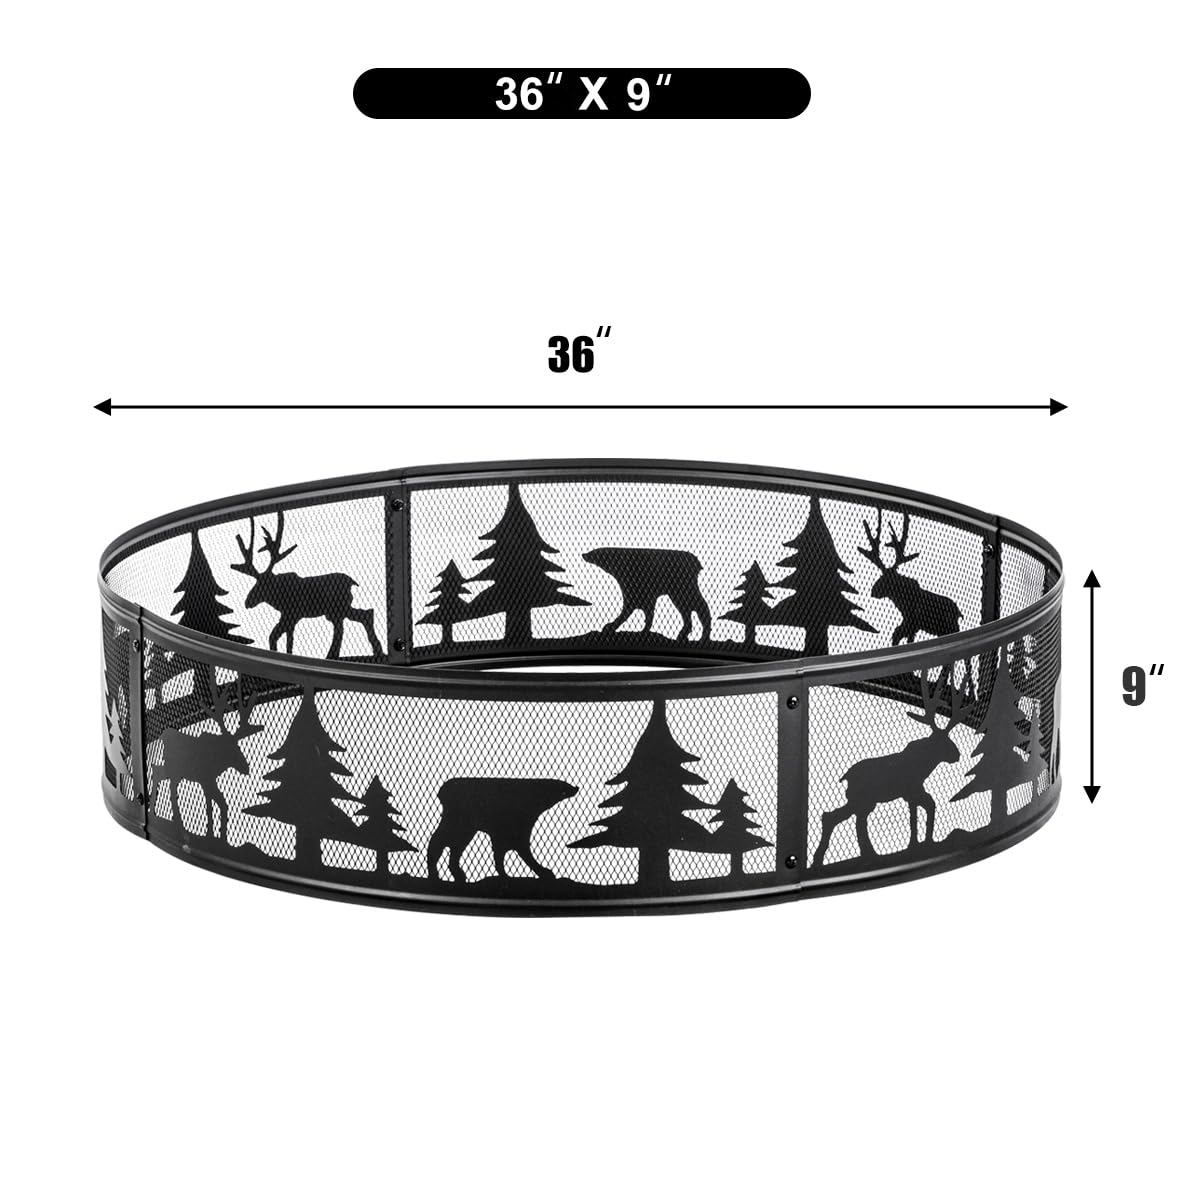 36 Inch Fire Ring with Forest and Animals Design 360° Carving,Portable Steel Fire Rings for Outdoor Camping Bonfire Beaches Park Patio Backyard